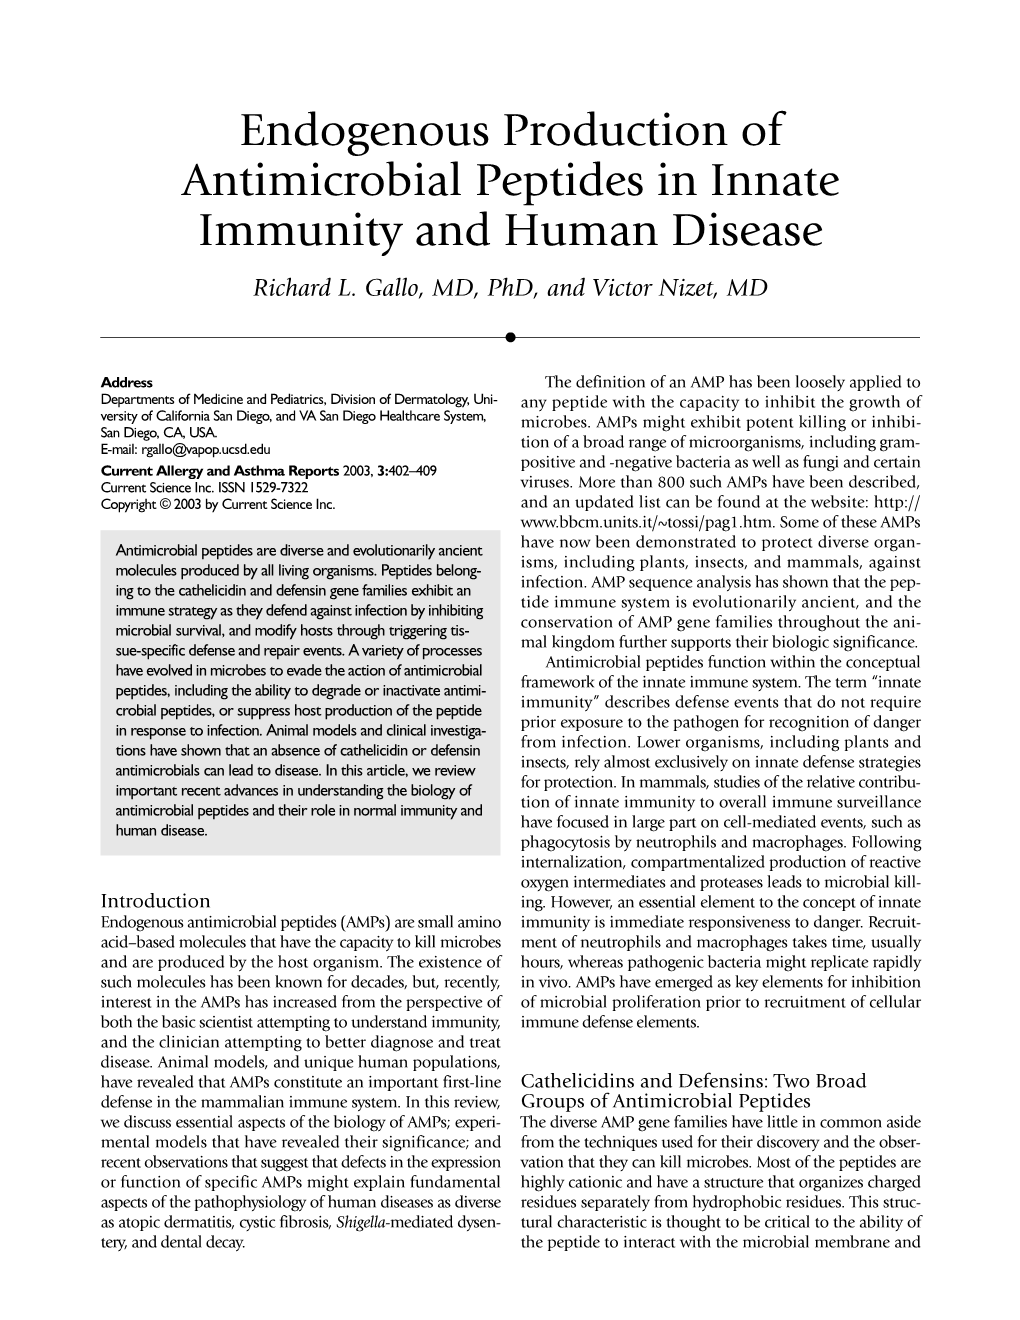 Endogenous Production of Antimicrobial Peptides in Innate Immunity and Human Disease Richard L